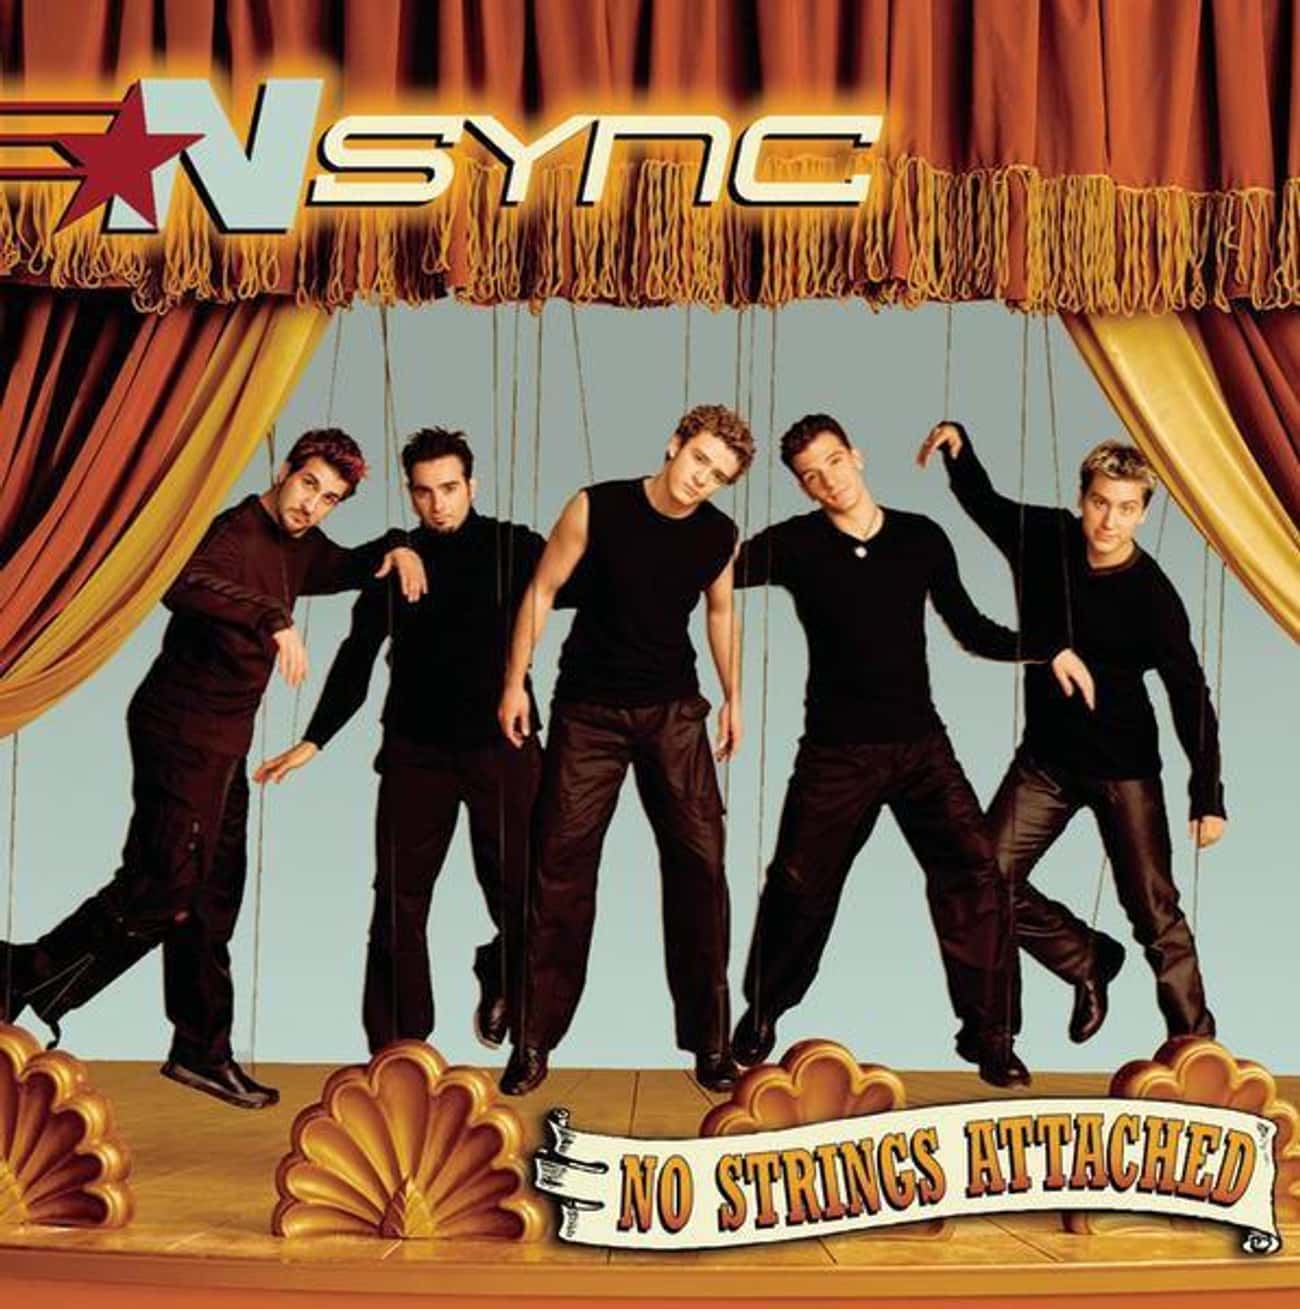 *NSYNC Had As Many Top Ten Hits As BSB Even Though They Only Released Three Albums